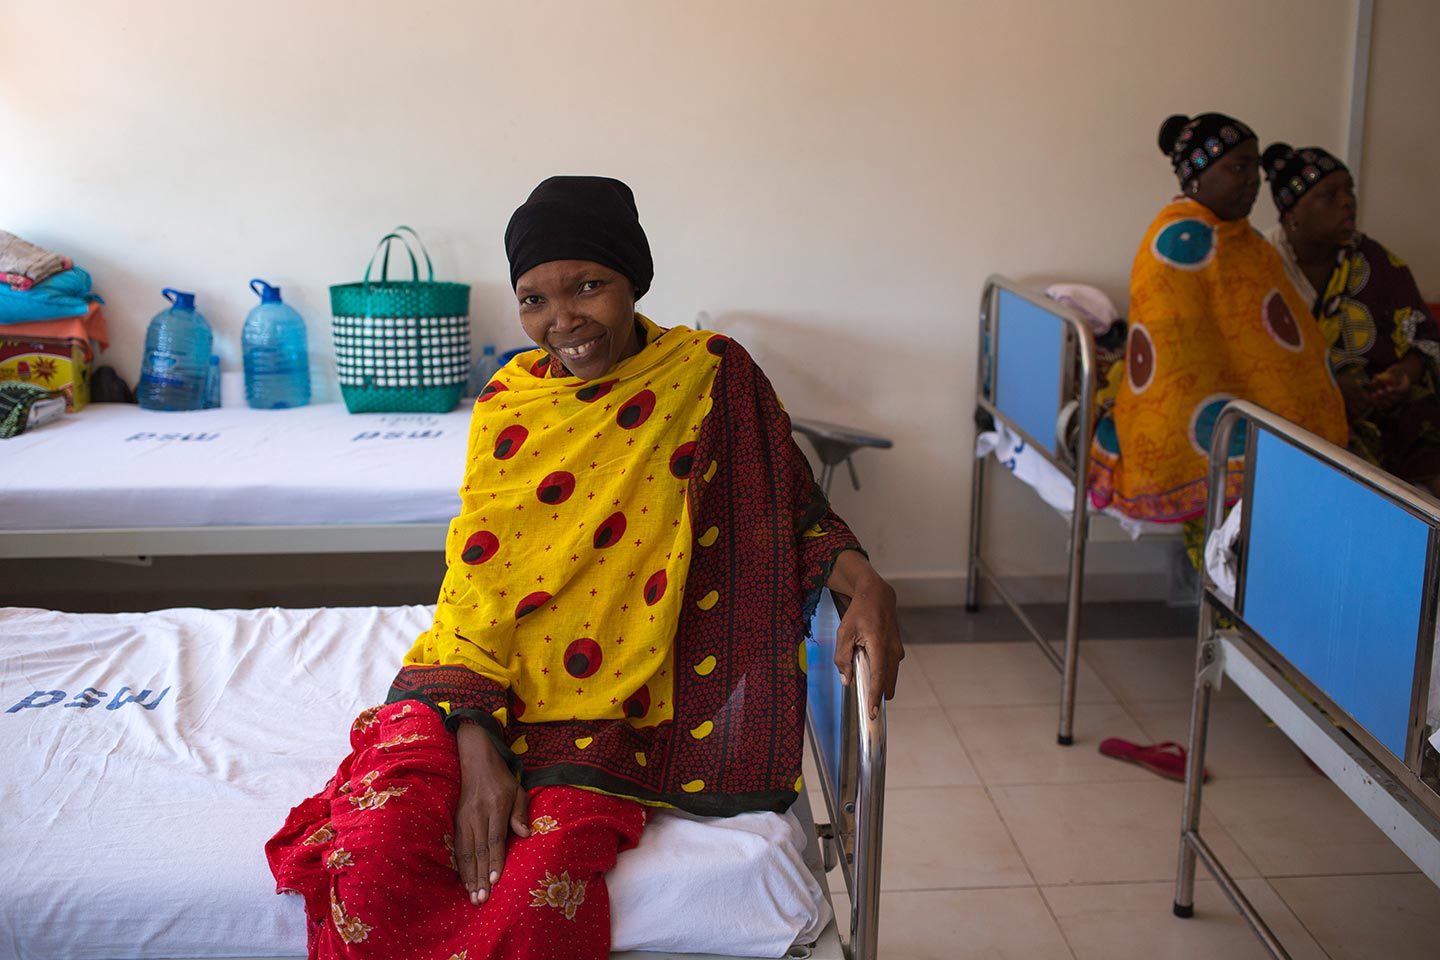 Cervical cancer patient Rehema Hussein poses with her scarf to cover her hair loss at the Ocean Road Cancer Institute in Dar es Salaam. – Credit: Gavi/2014/Karel Prinsloo